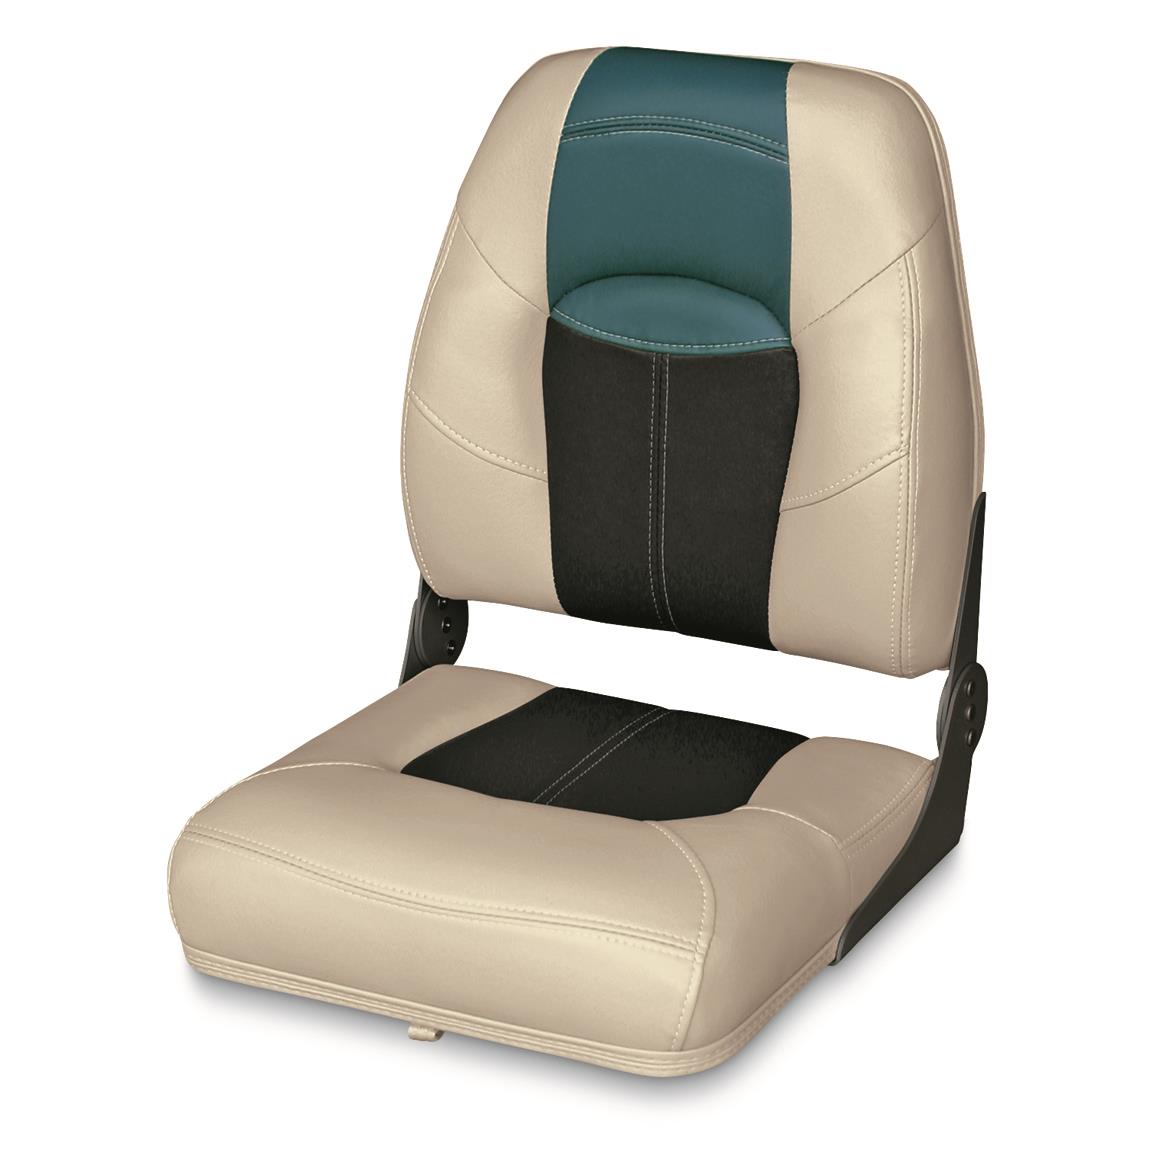 Wise Deluxe Boat Lounge Seat - 96446, Fold Down Seats at Sportsman's Guide